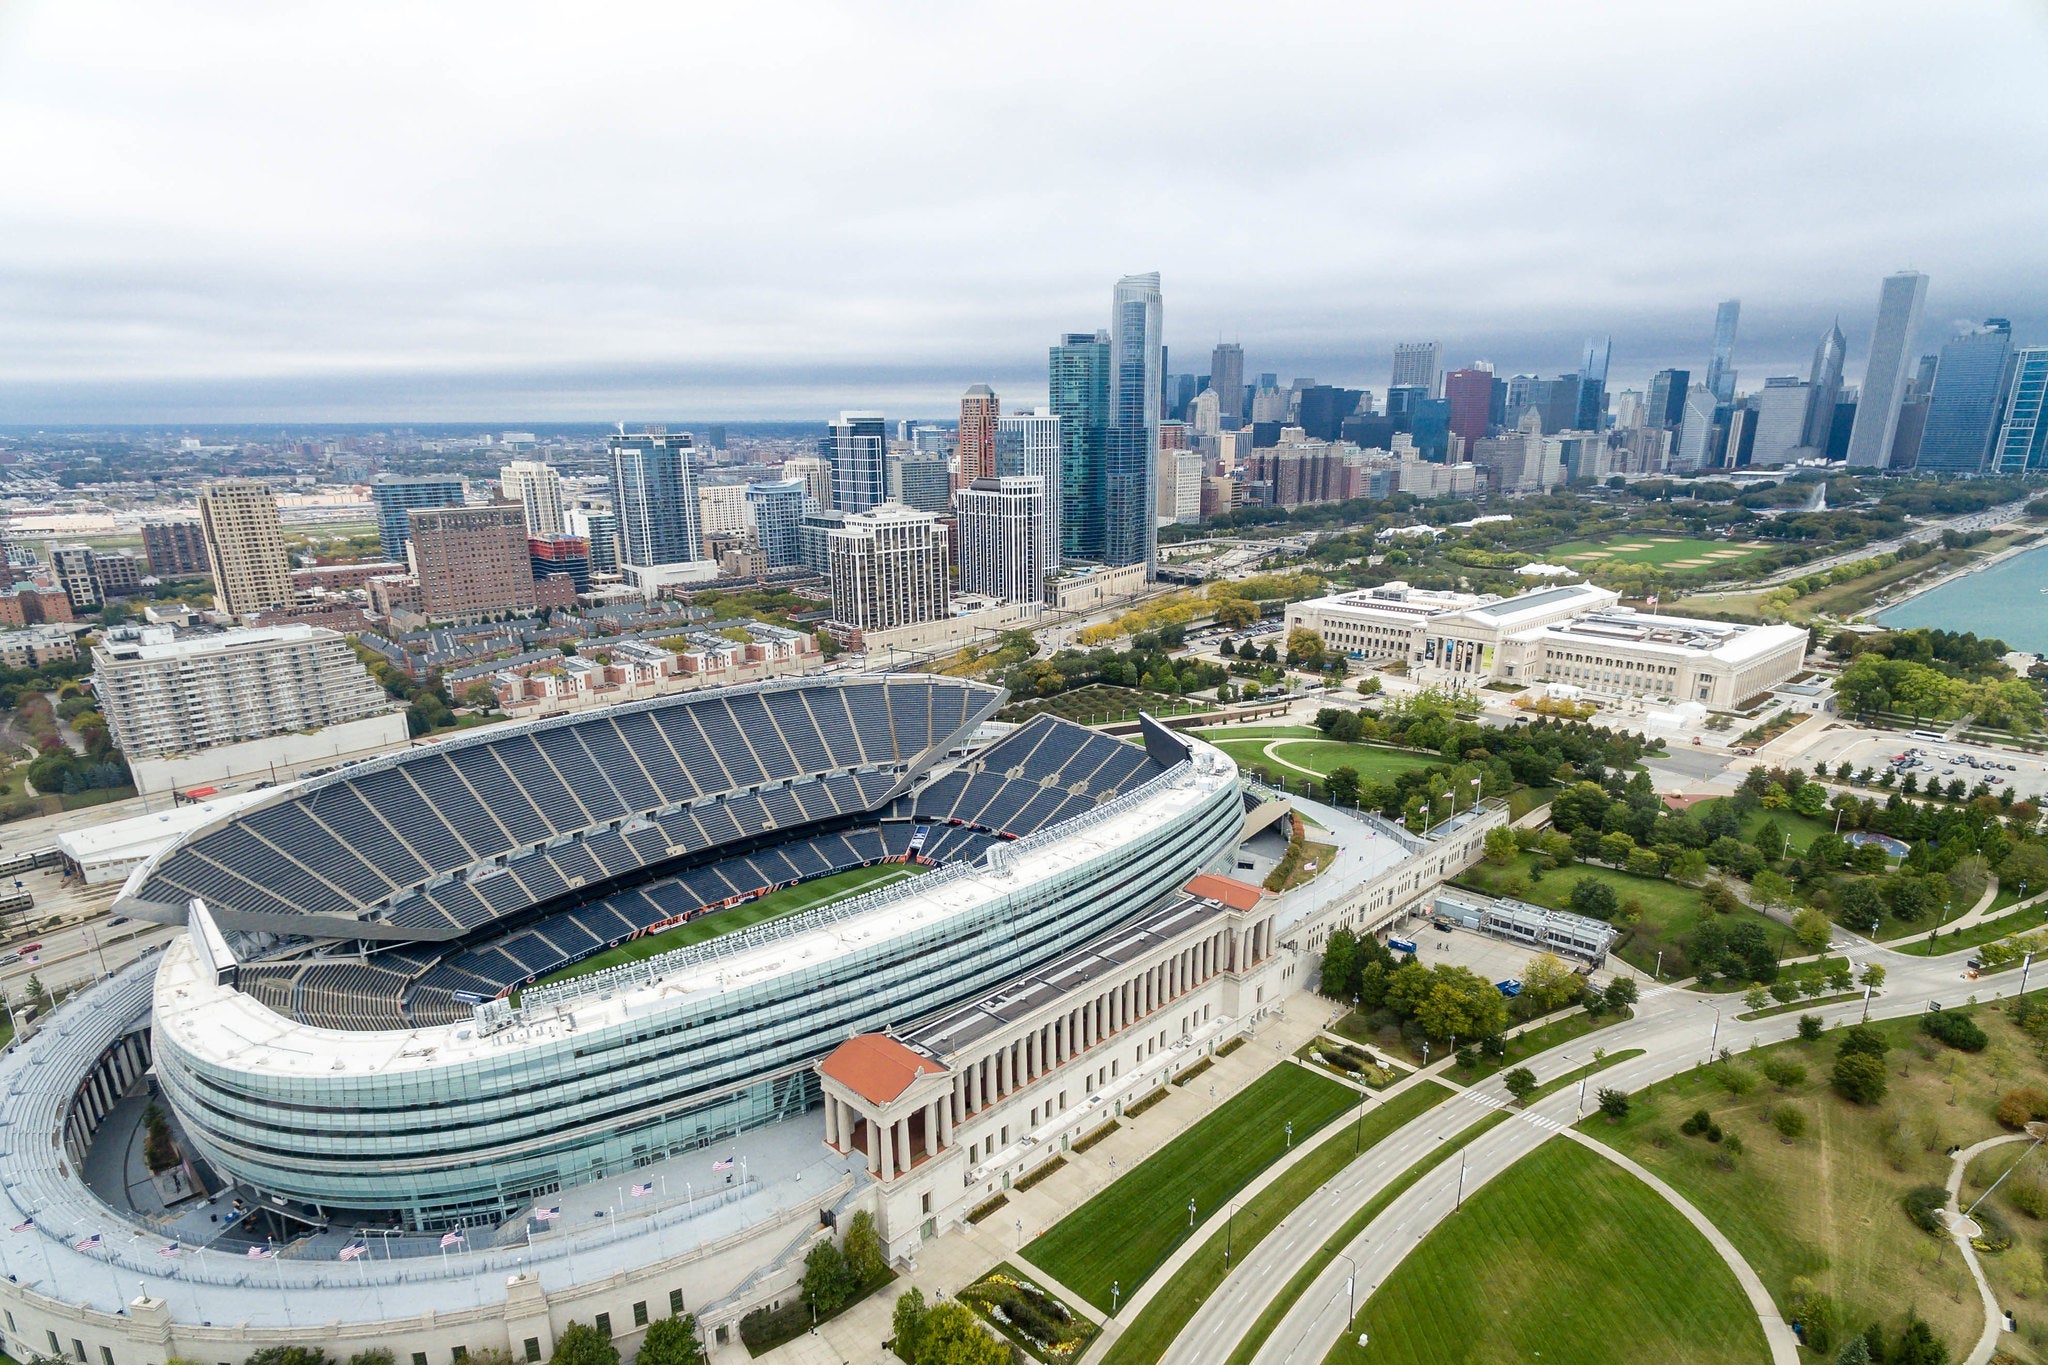 chicago bears playing field